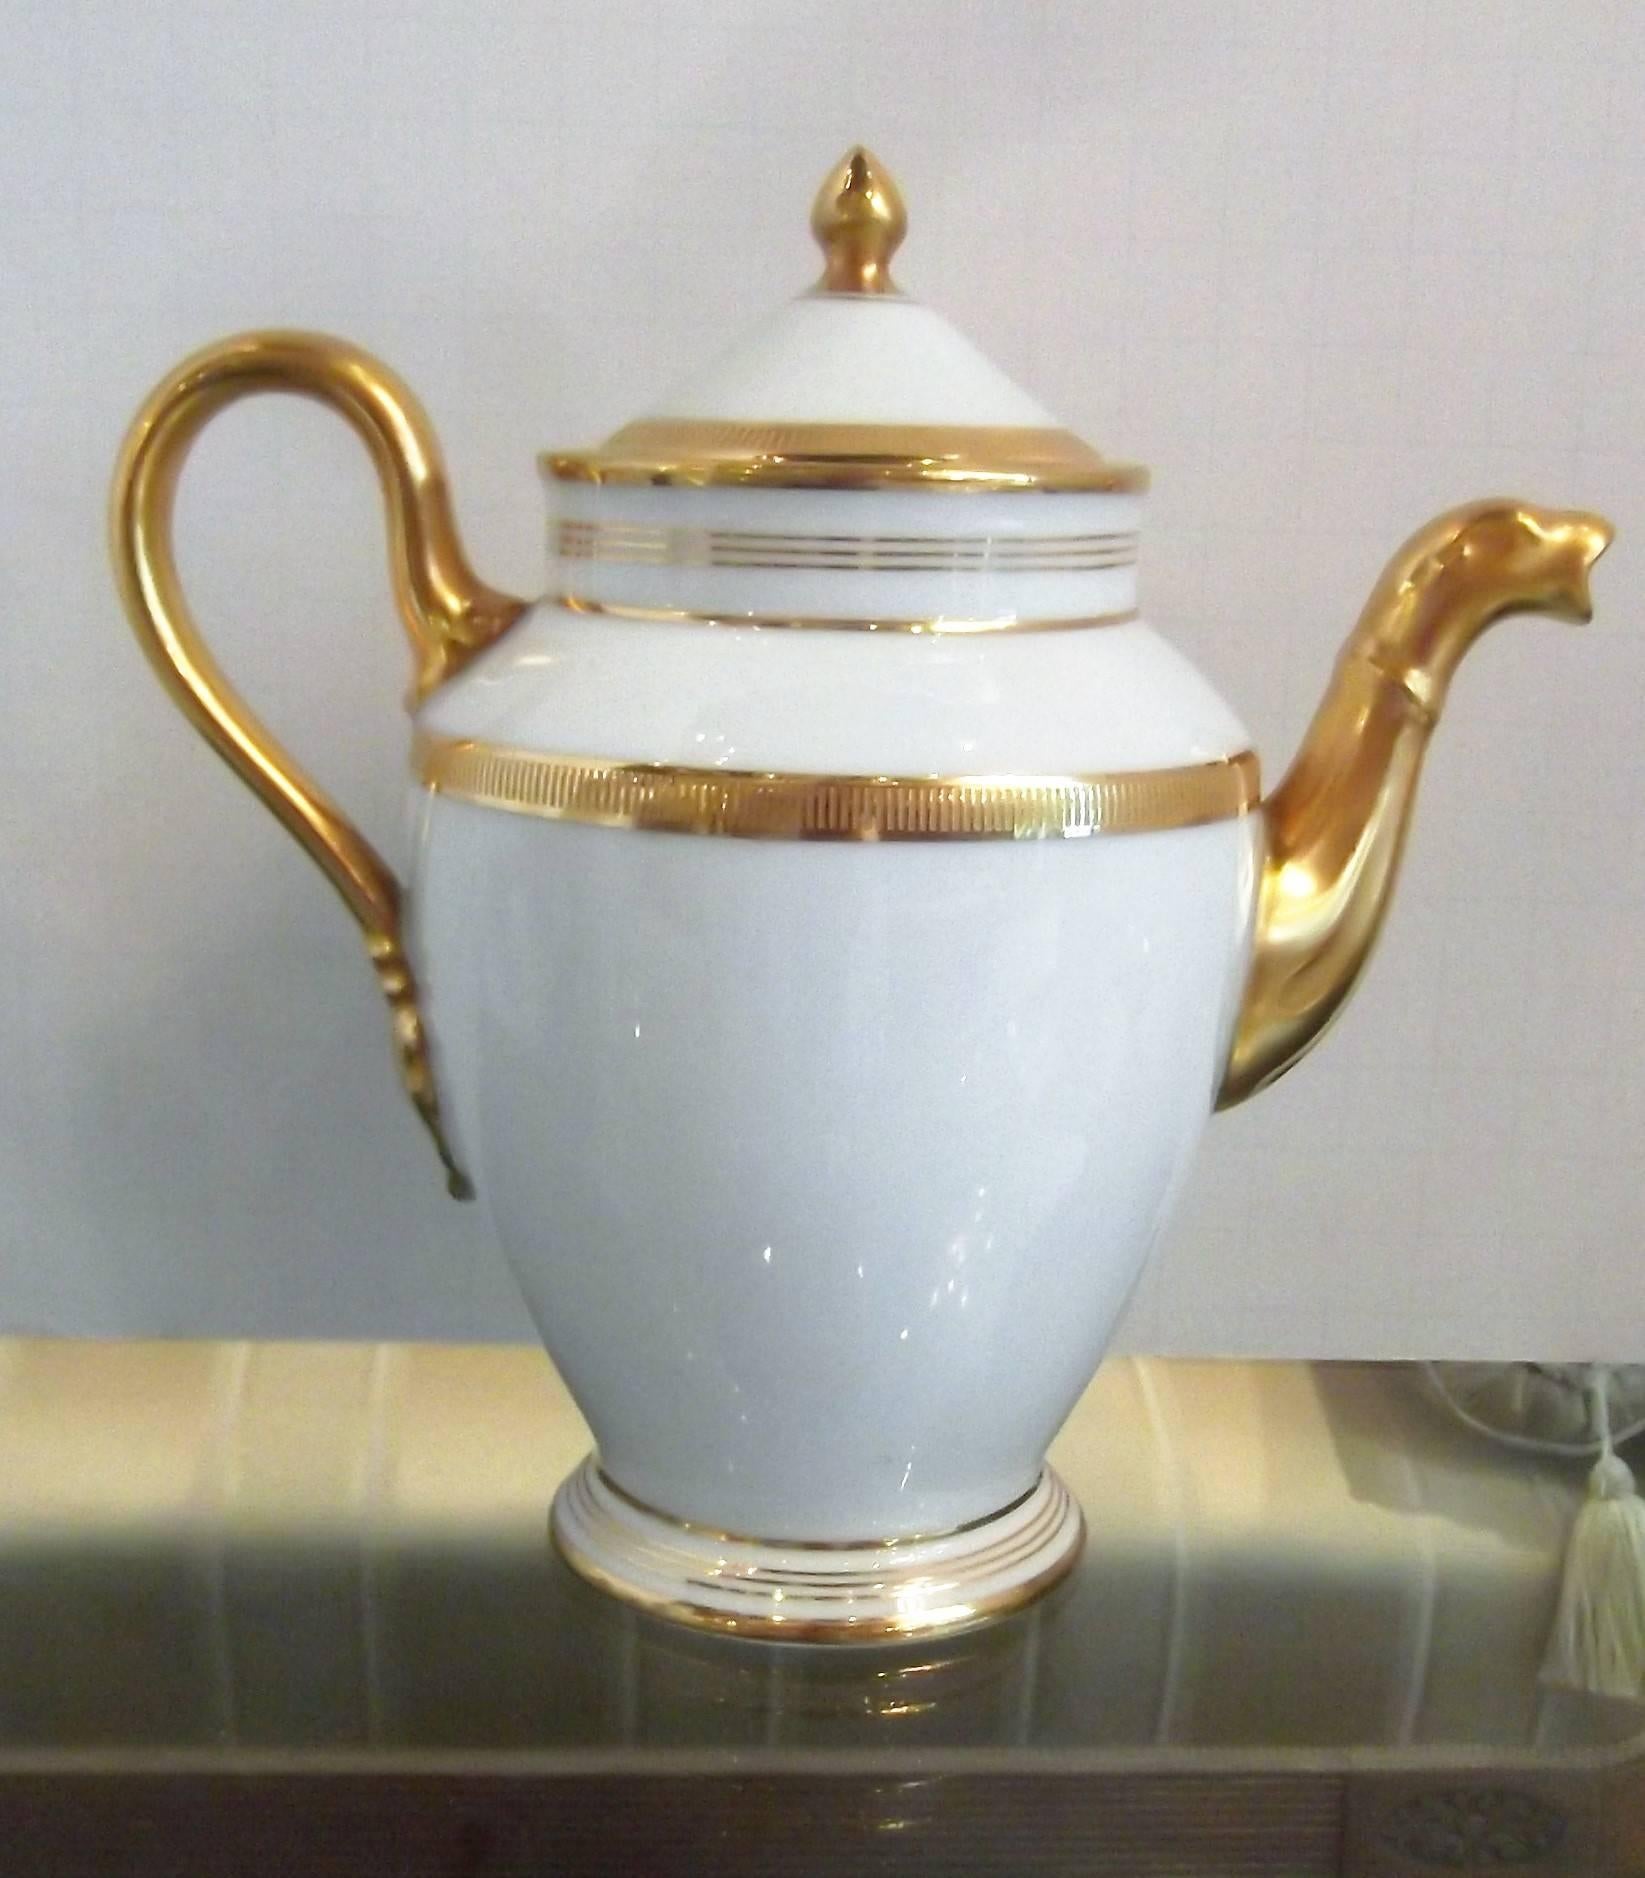 Elegant gold and white Espresso coffee set made by Italian maker Richard Ginori. R. Ginori is considered the Ferrari of Italian porcelain makers well designed and timeless styling. The set includes a small espresso pot, tall creamer, covered sugar